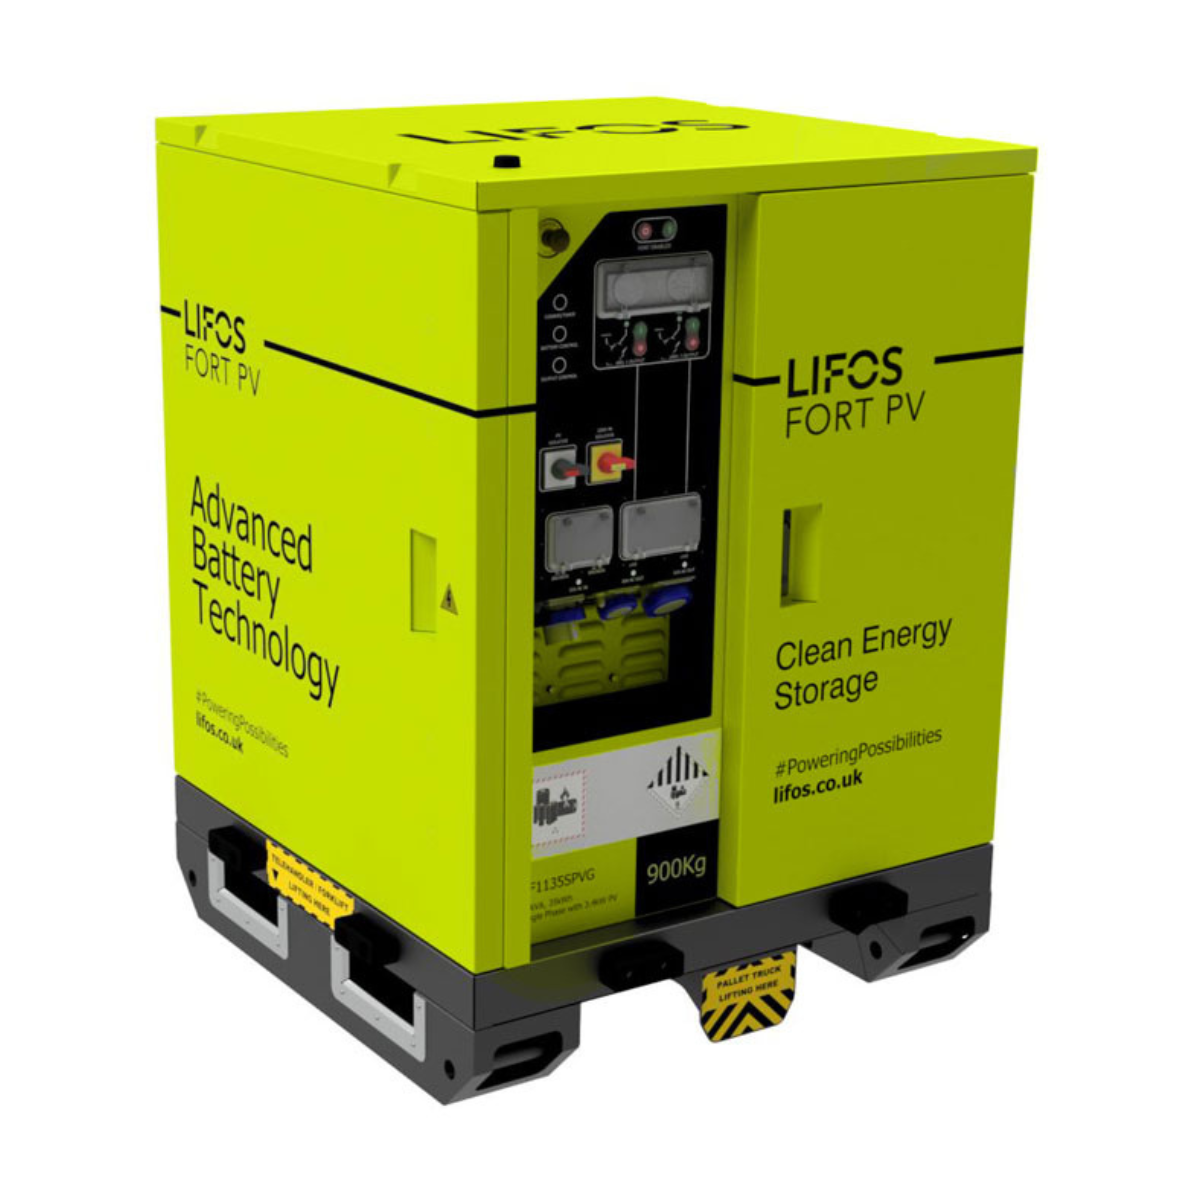 The Lifos Fort PV Battery Generator is a portable, hybrid energy solution designed for remote or temporary locations. 35.1kW Storage Capacity.